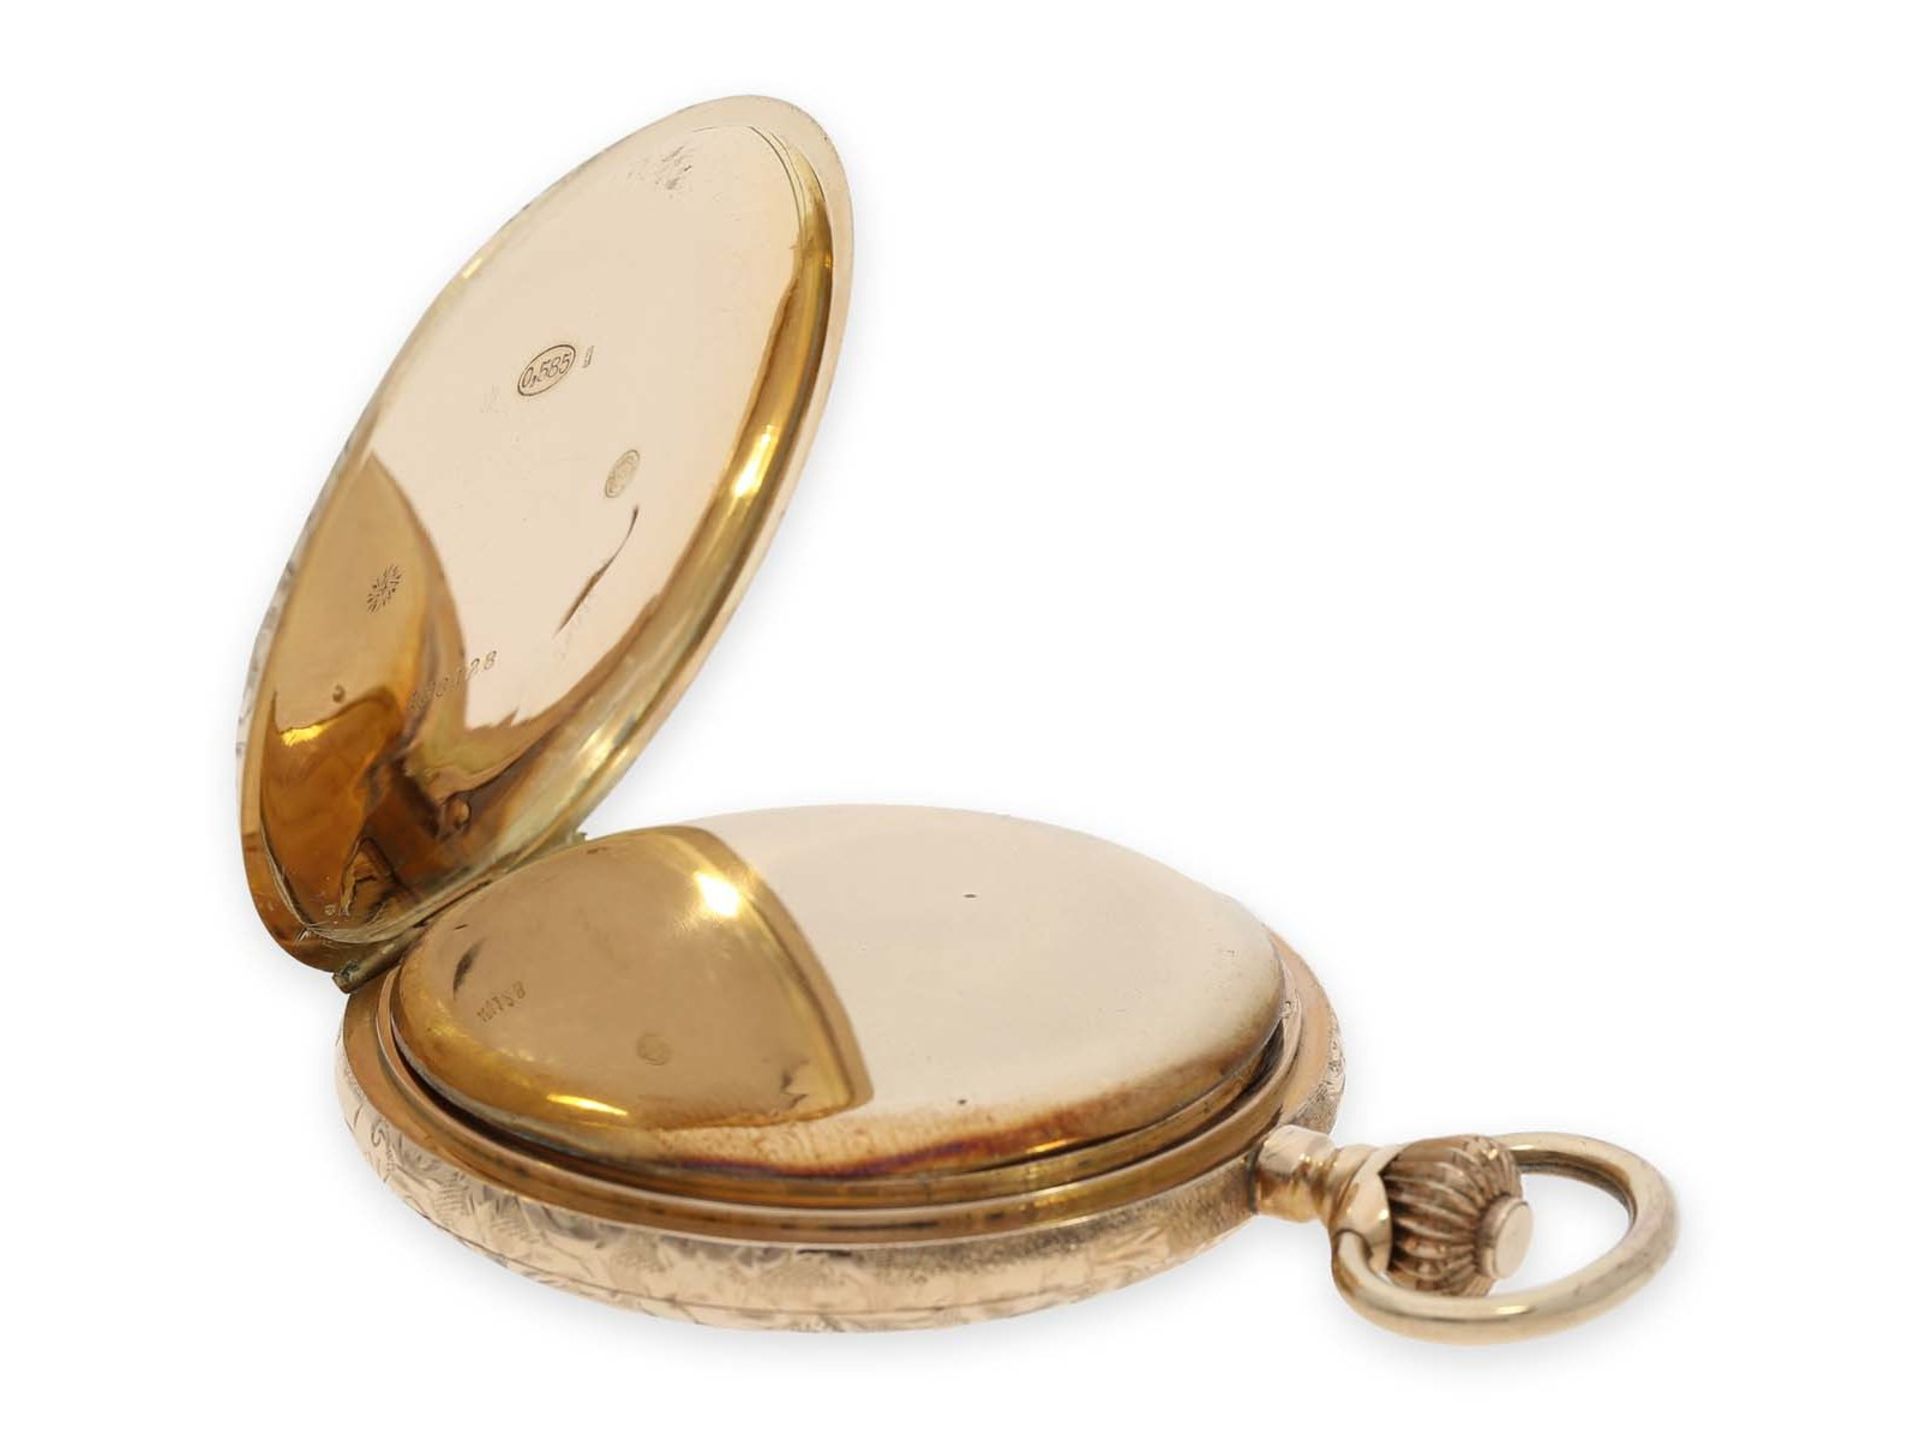 Pocket watch: pink gold Art Nouveau splendour hunting case watch with fine quality case, Switzerland - Image 5 of 7